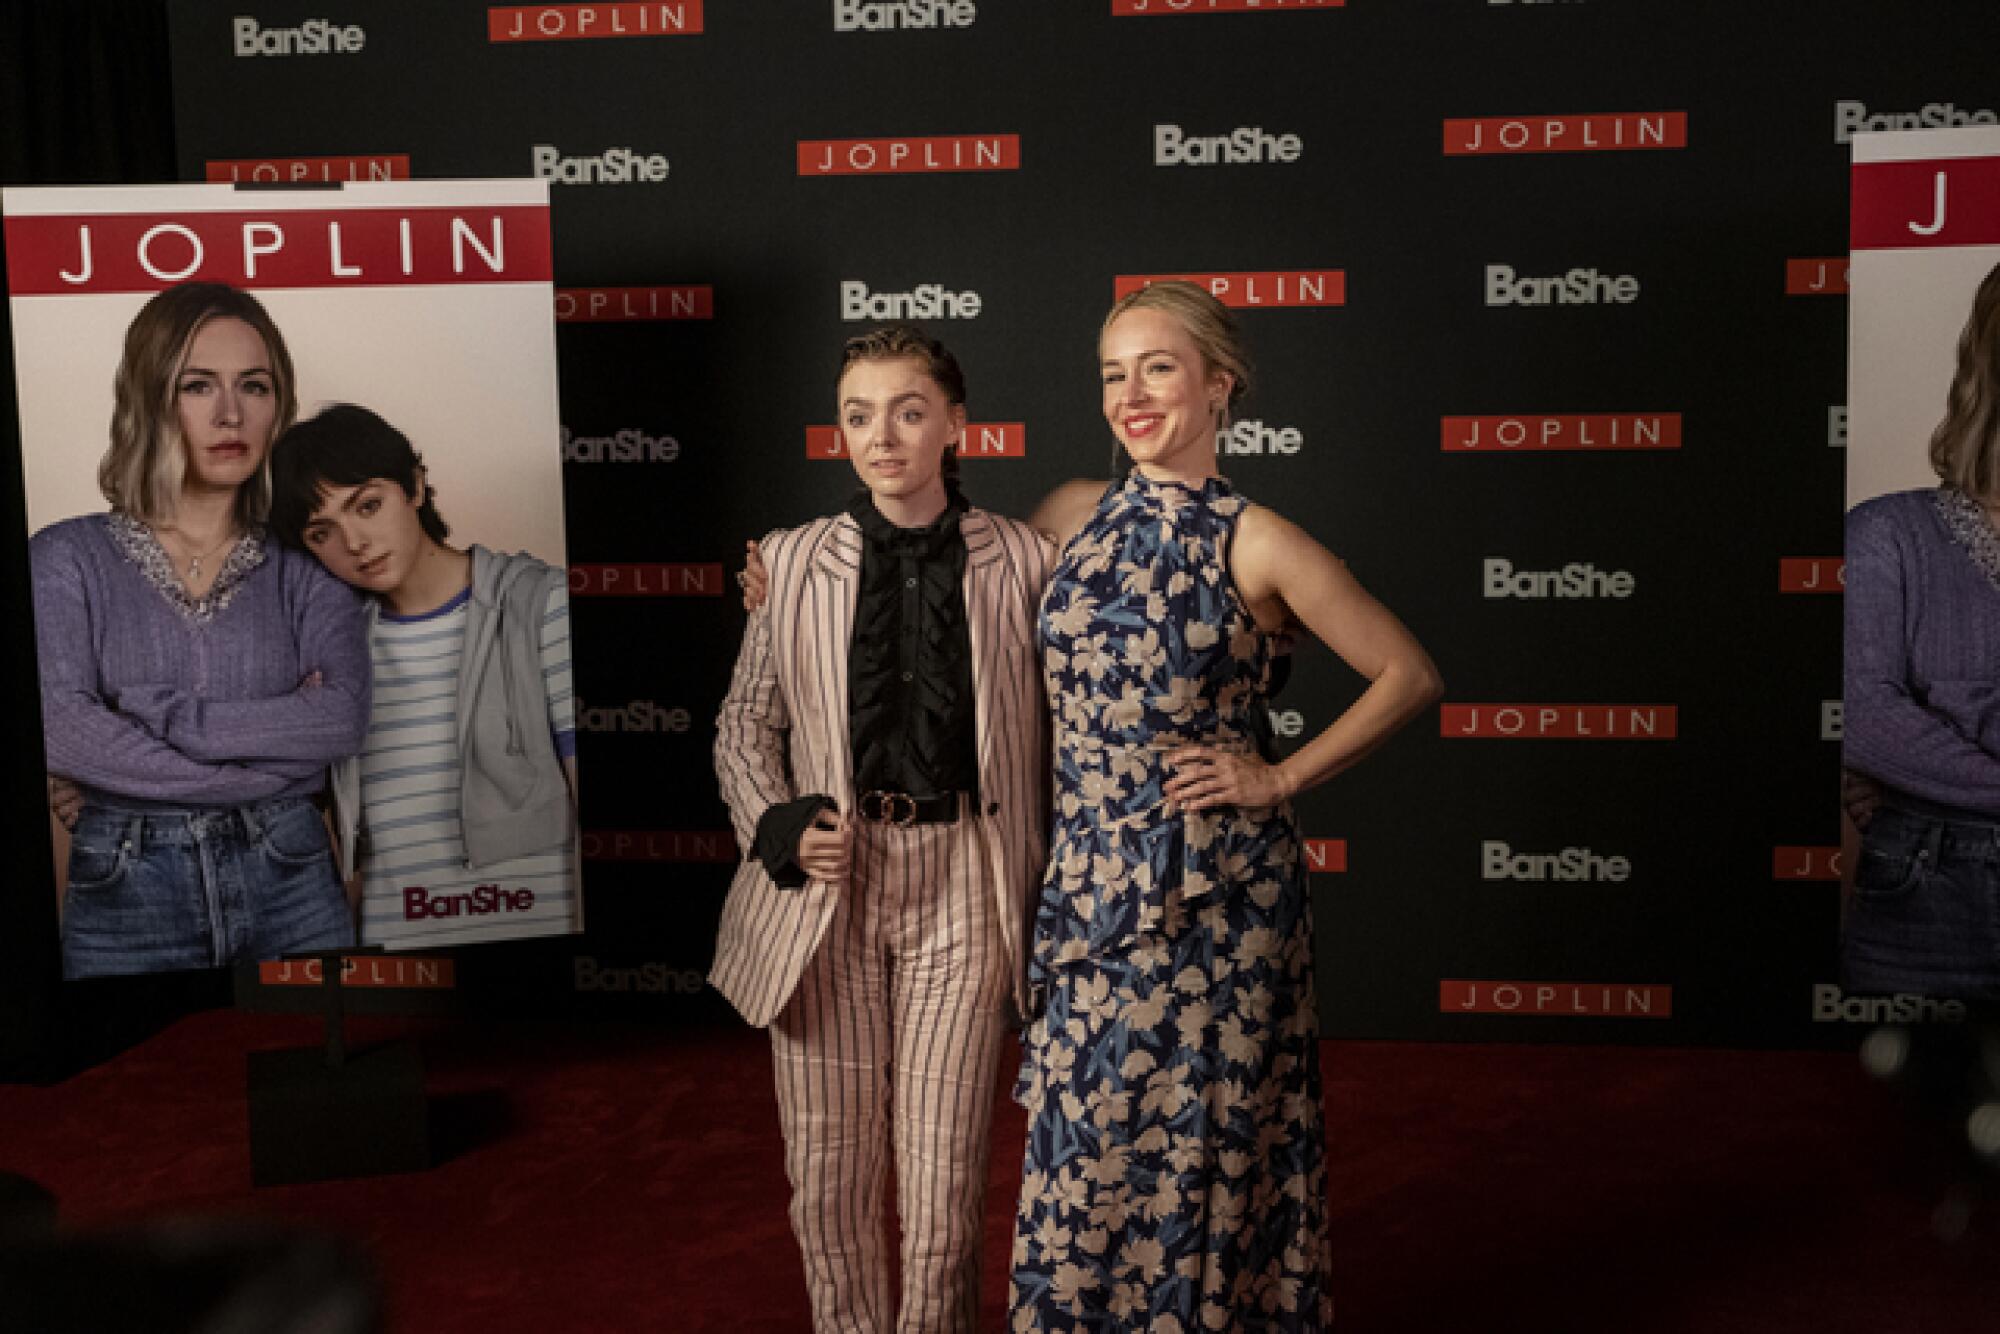 Two women pose on the red carpet at a streaming TV show premiere.